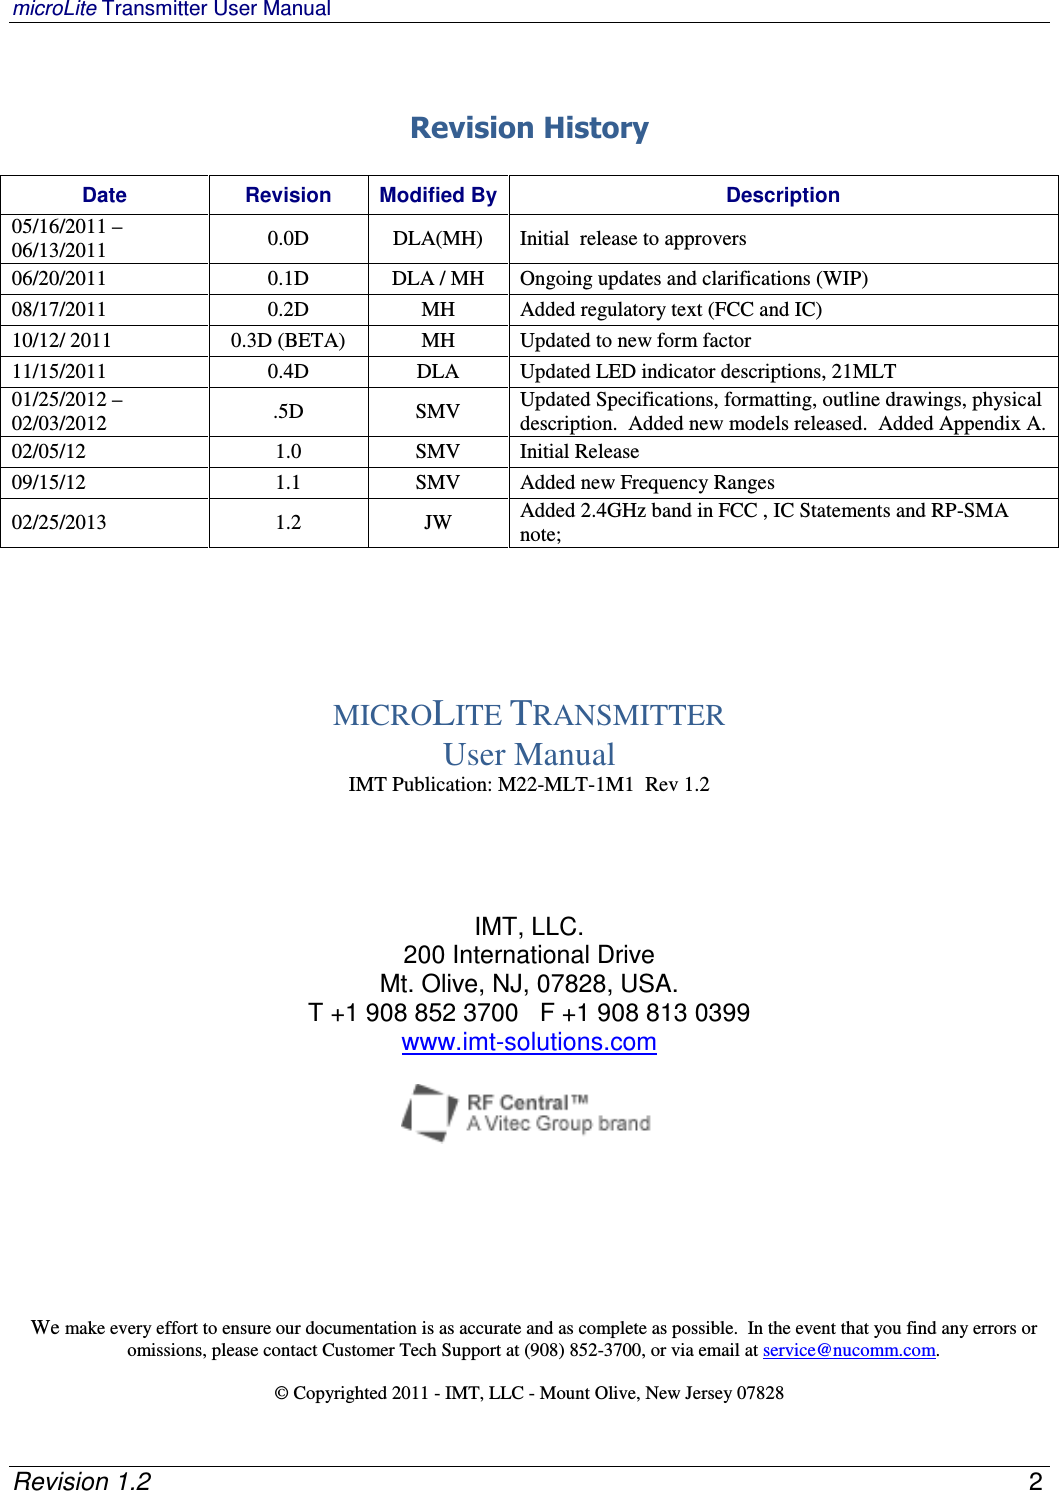 microLite Transmitter User Manual   Revision 1.2    2   Revision History  Date  Revision  Modified By Description 05/16/2011 – 06/13/2011  0.0D  DLA(MH)  Initial  release to approvers 06/20/2011  0.1D  DLA / MH  Ongoing updates and clarifications (WIP) 08/17/2011  0.2D  MH  Added regulatory text (FCC and IC) 10/12/ 2011  0.3D (BETA)  MH  Updated to new form factor 11/15/2011  0.4D  DLA  Updated LED indicator descriptions, 21MLT 01/25/2012 – 02/03/2012  .5D  SMV  Updated Specifications, formatting, outline drawings, physical description.  Added new models released.  Added Appendix A. 02/05/12  1.0  SMV  Initial Release 09/15/12  1.1  SMV  Added new Frequency Ranges 02/25/2013  1.2  JW  Added 2.4GHz band in FCC , IC Statements and RP-SMA note;      MICROLITE TRANSMITTER User Manual IMT Publication: M22-MLT-1M1  Rev 1.2     IMT, LLC. 200 International Drive Mt. Olive, NJ, 07828, USA. T +1 908 852 3700   F +1 908 813 0399    www.imt-solutions.com         We make every effort to ensure our documentation is as accurate and as complete as possible.  In the event that you find any errors or omissions, please contact Customer Tech Support at (908) 852-3700, or via email at service@nucomm.com.  © Copyrighted 2011 - IMT, LLC - Mount Olive, New Jersey 07828 